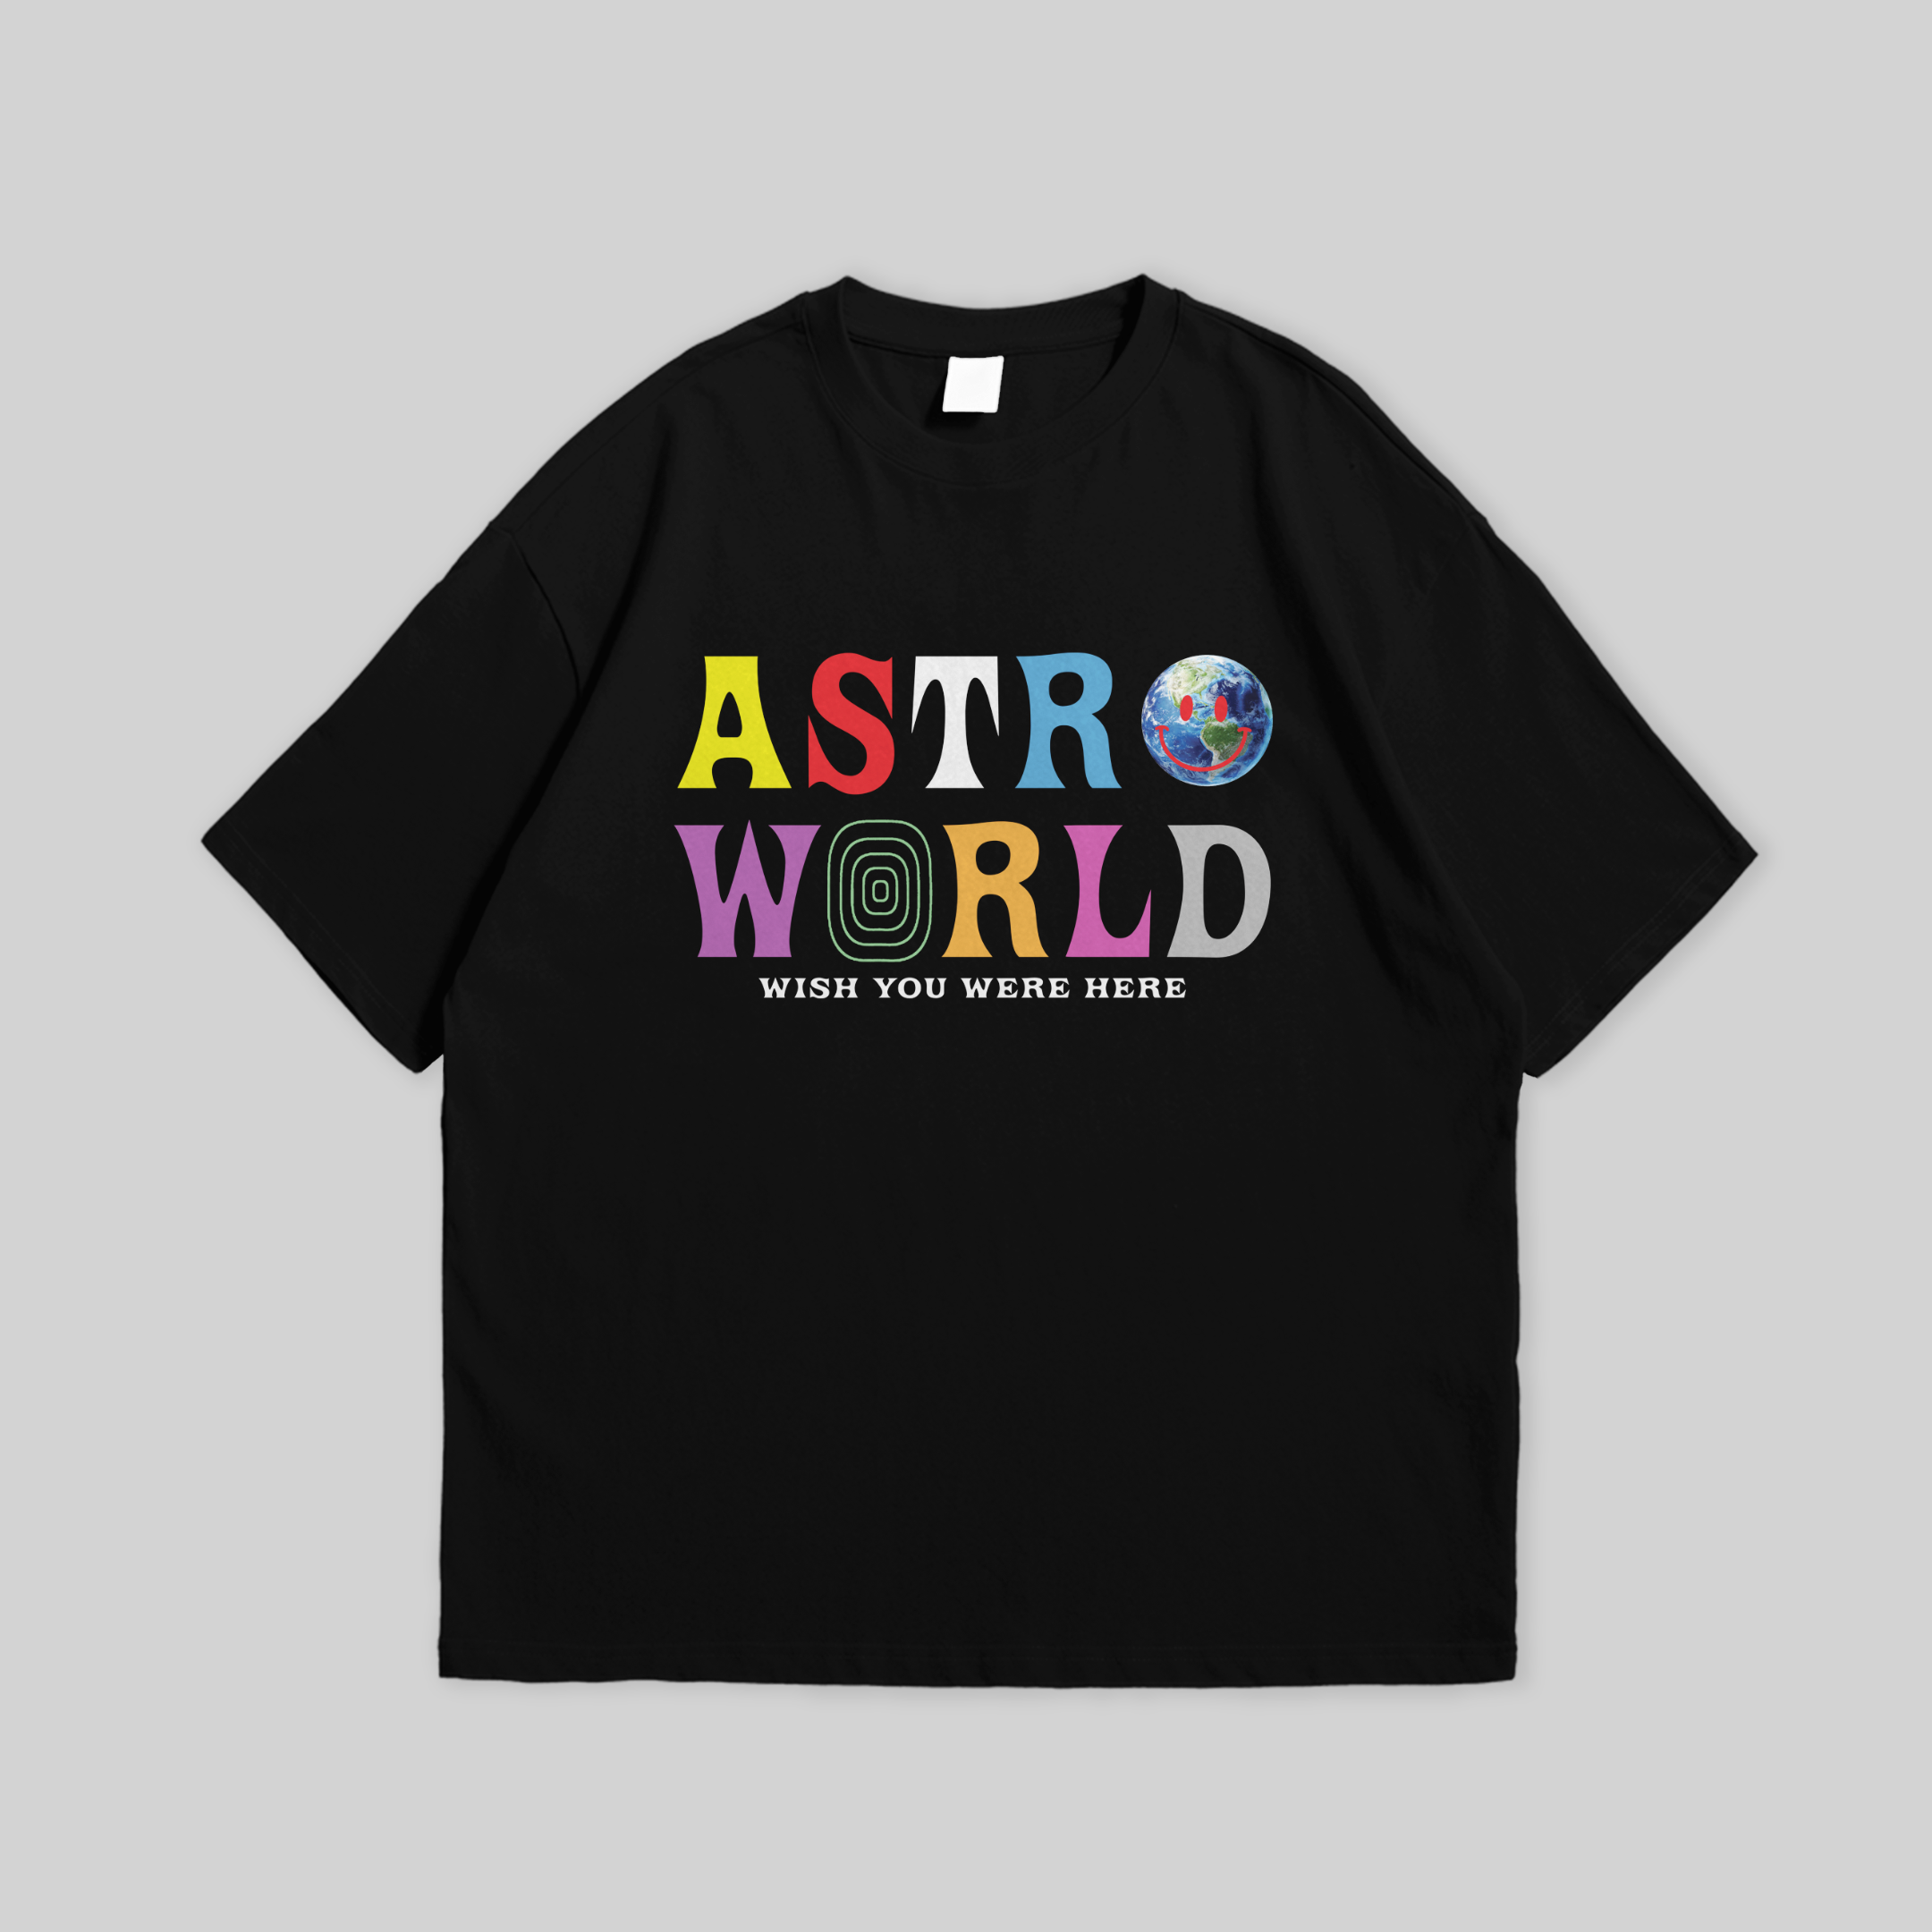 A black unisex T-shirt with colorful ASTROWORLD and WISH YOU WERE HERE text, perfect for a trendy and casual look, available in various sizes.